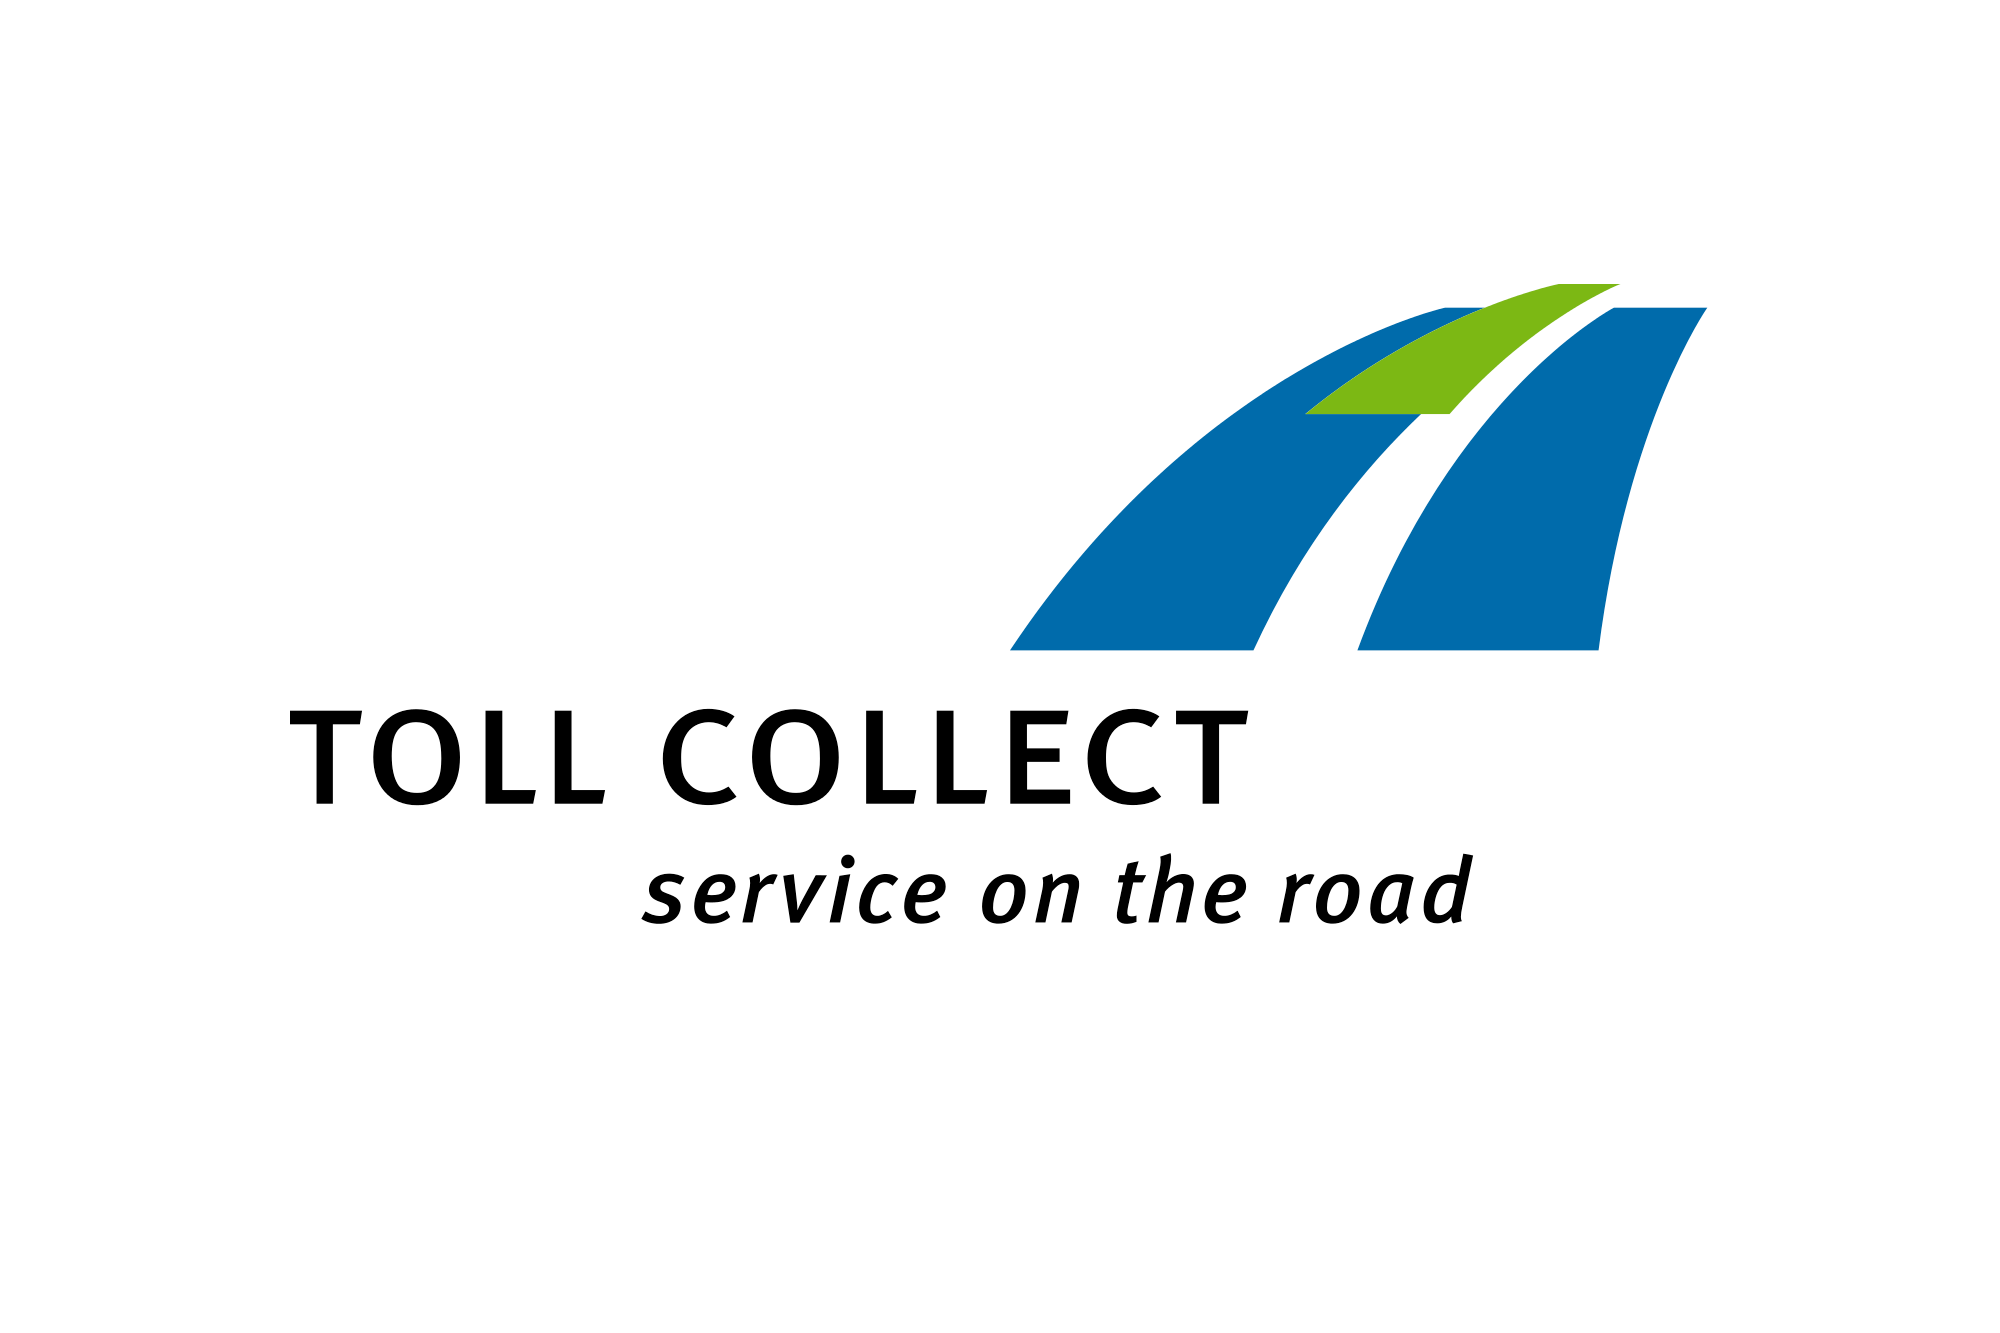 toll collect